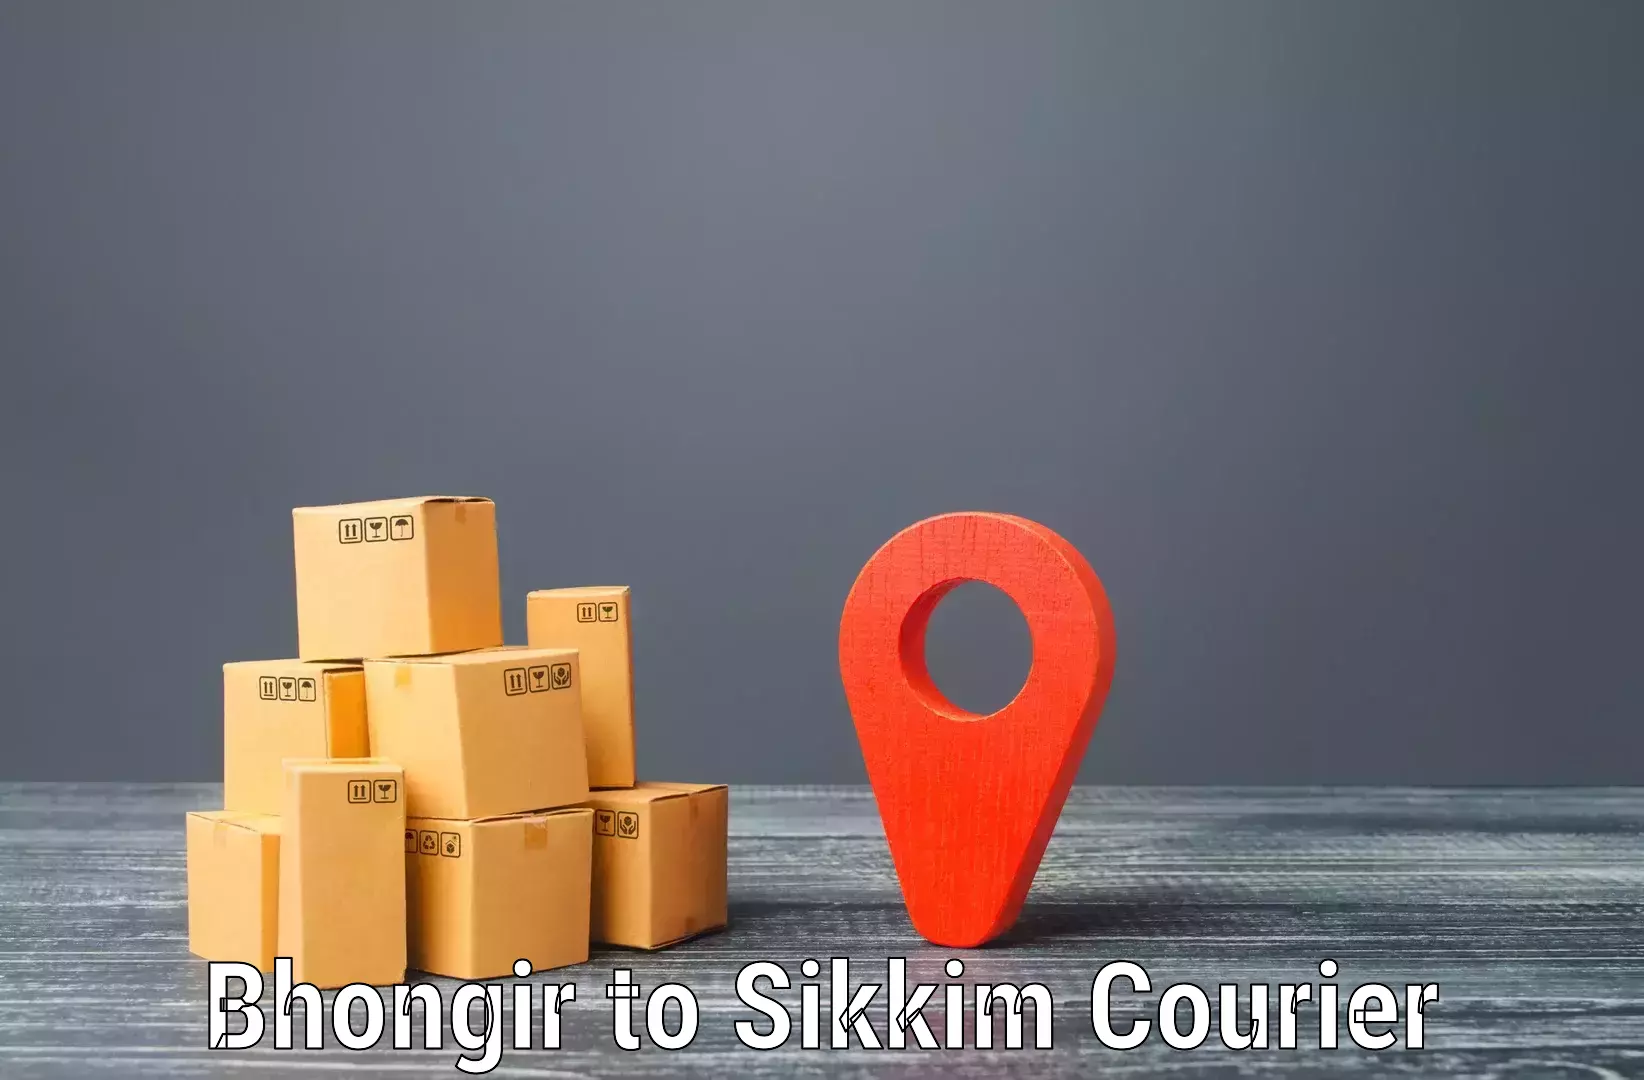 Seamless shipping experience Bhongir to North Sikkim